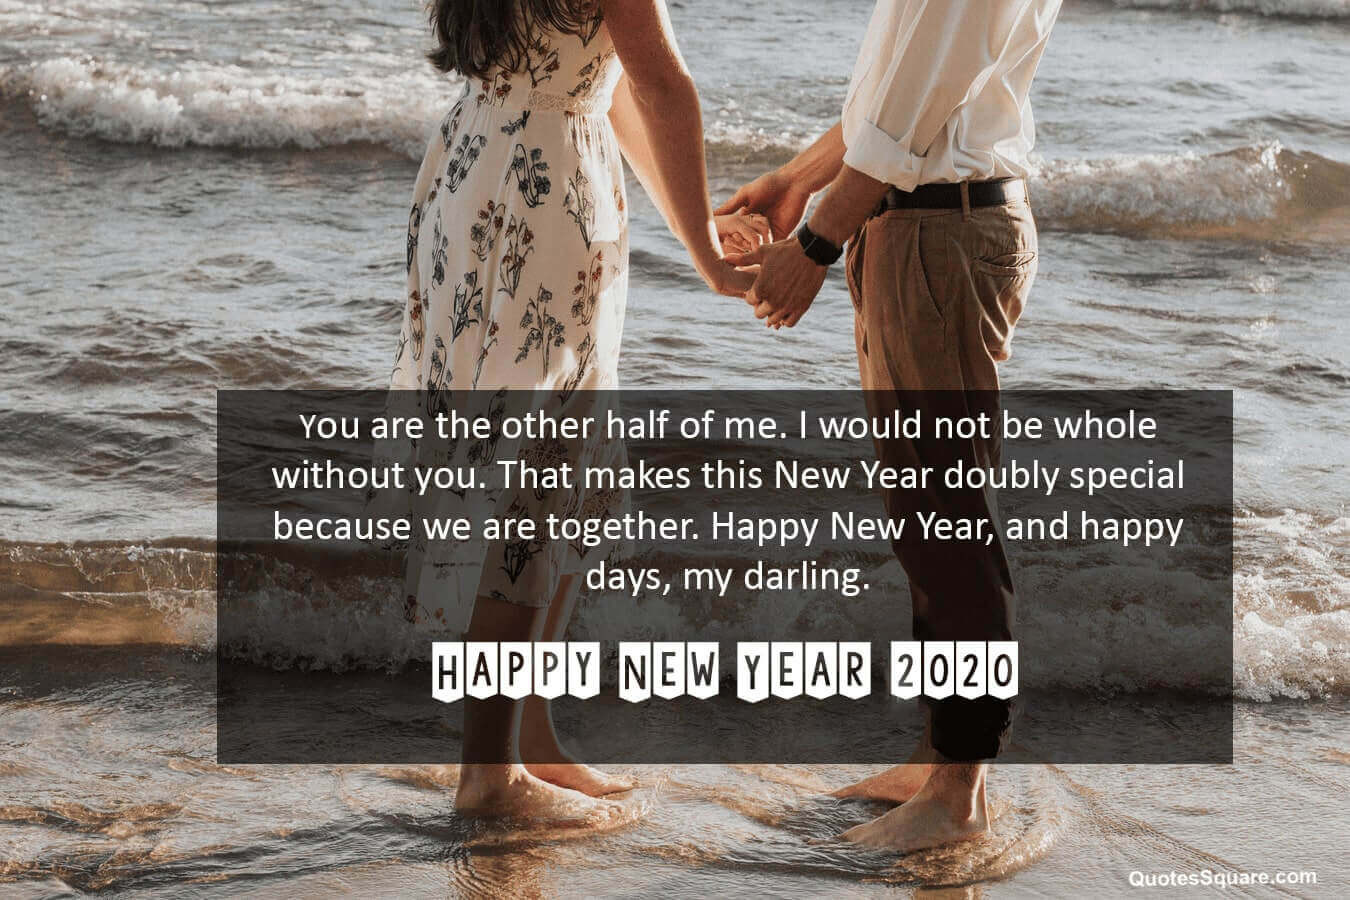 New Relationship Quotes For Her
 Top 20 Happy New Year 2021 and Love Quotes for Her